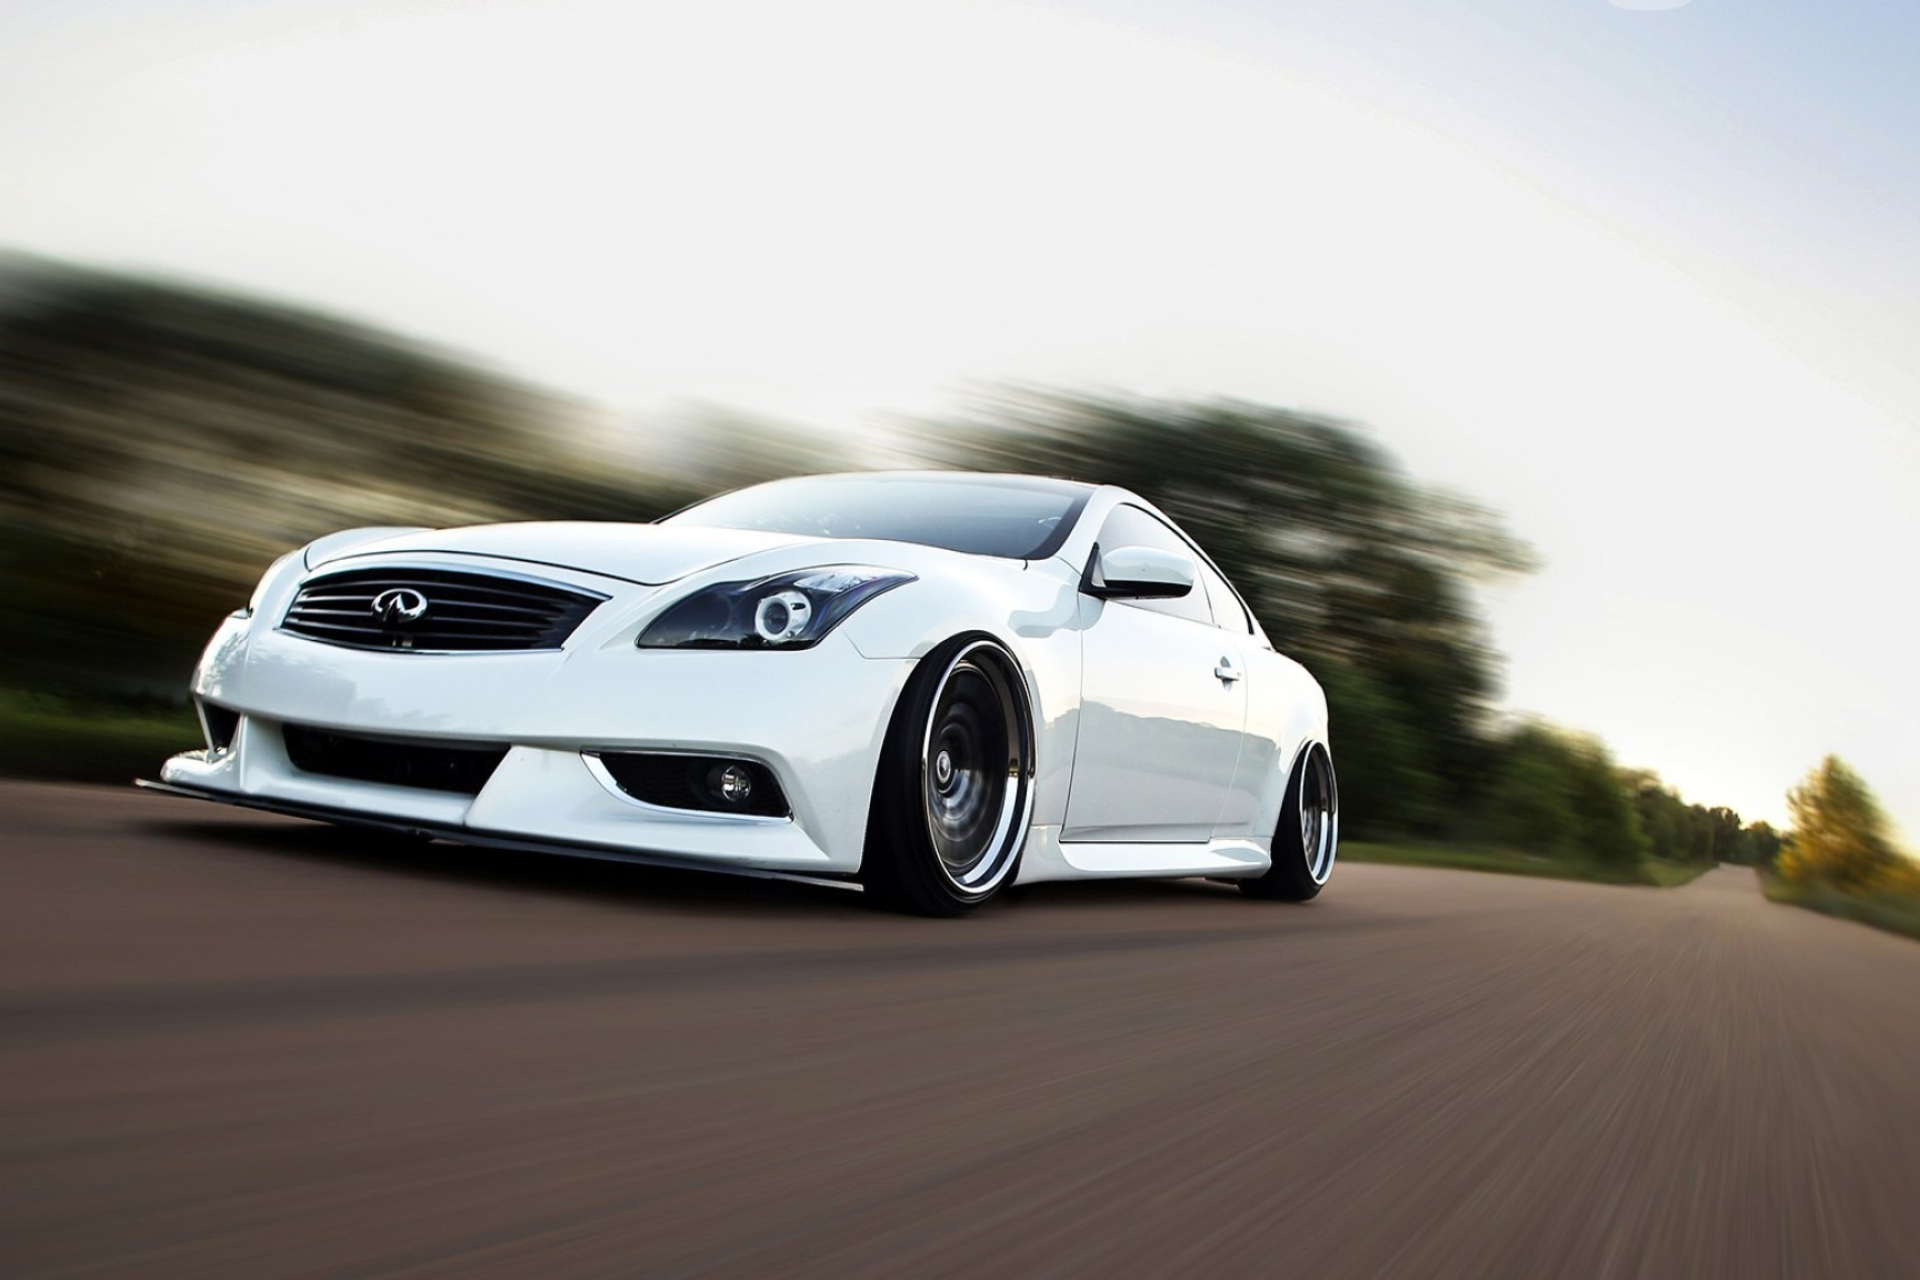 Infiniti G37, Stanced and awesome, Head-turning appearance, Blacked-out grille, 1920x1280 HD Desktop